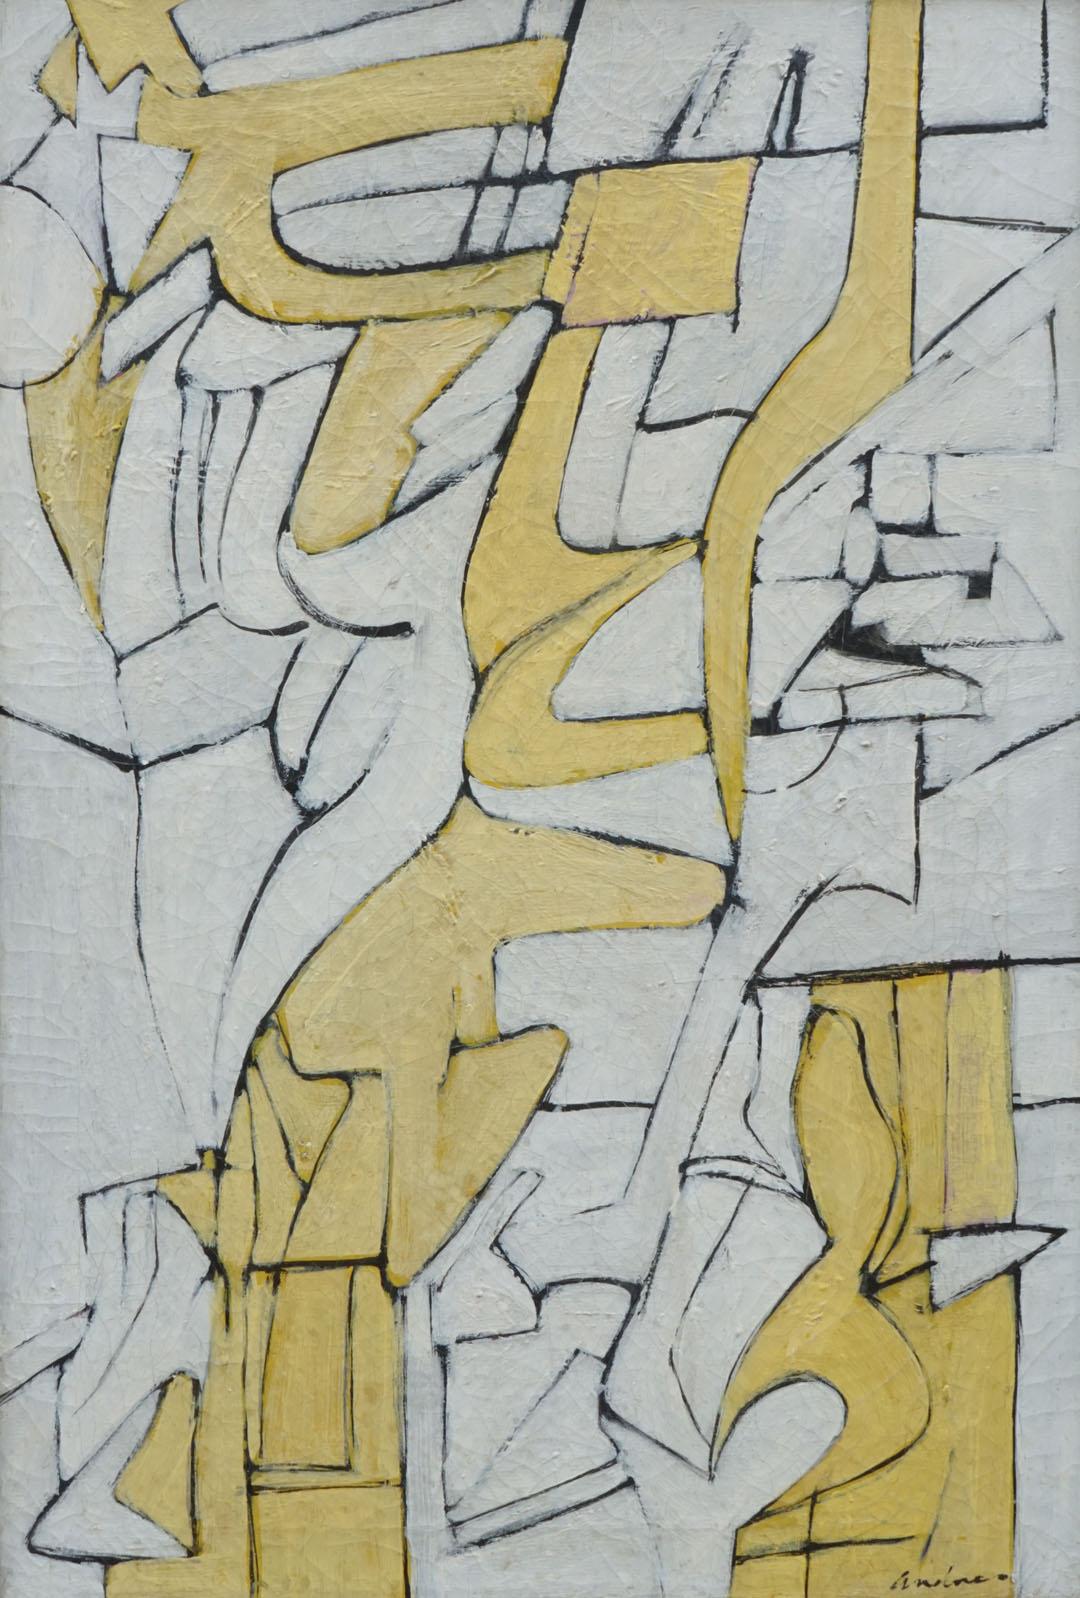 Richard Andres Interior Painting - Abstract expressionist, white and yellow mid-century modern geometric painting